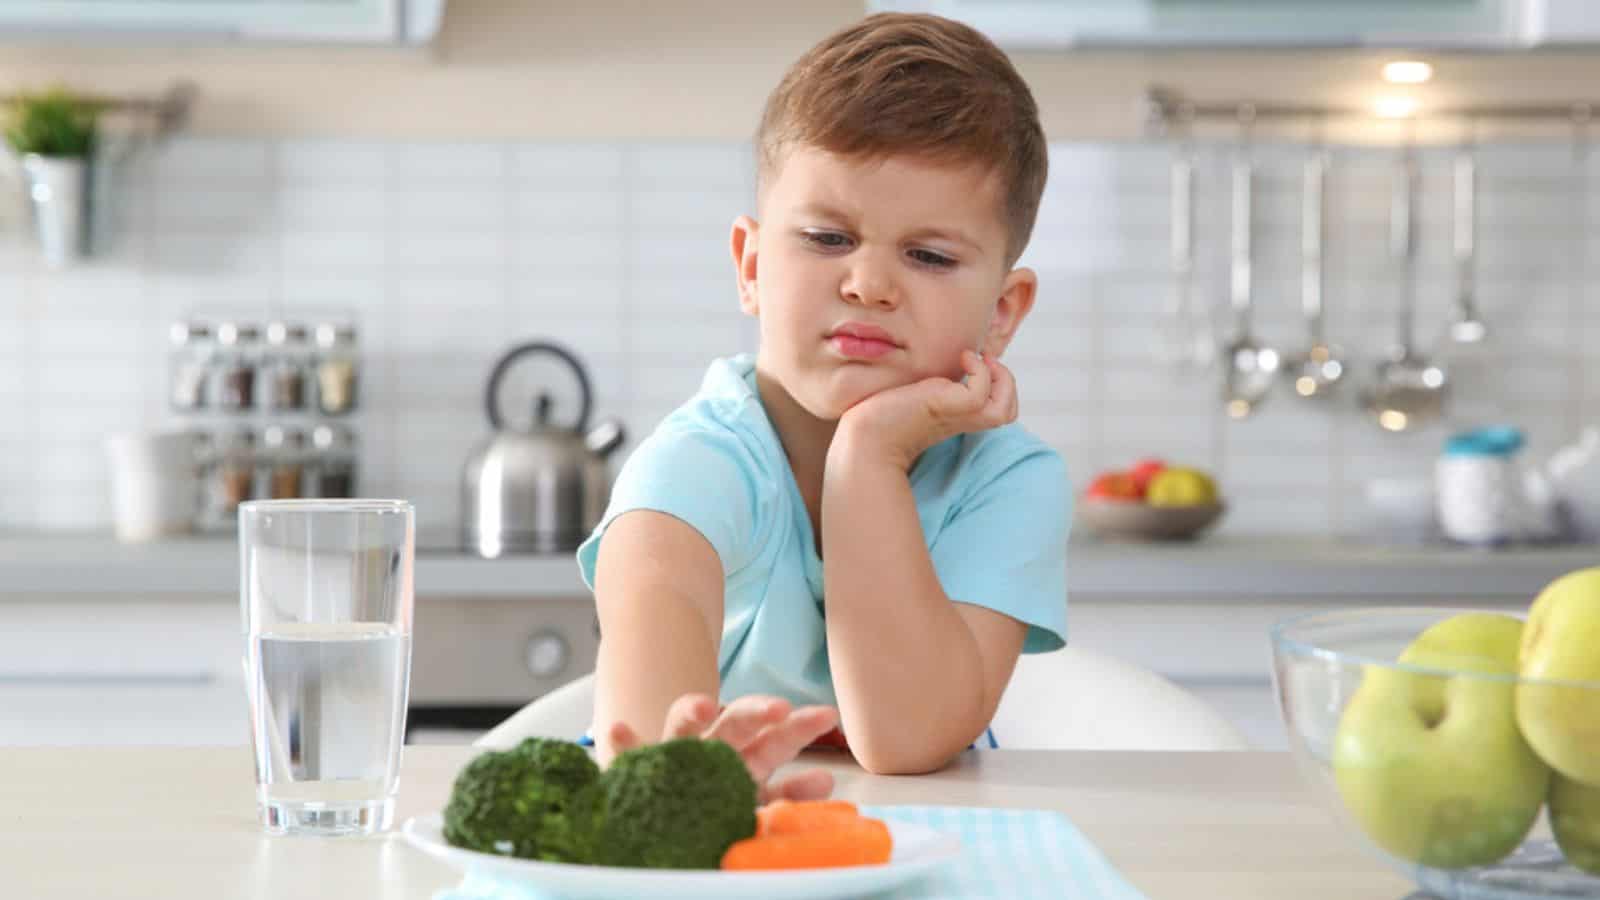 Adorable little boy refusing to eat vegetables at table in kitchen